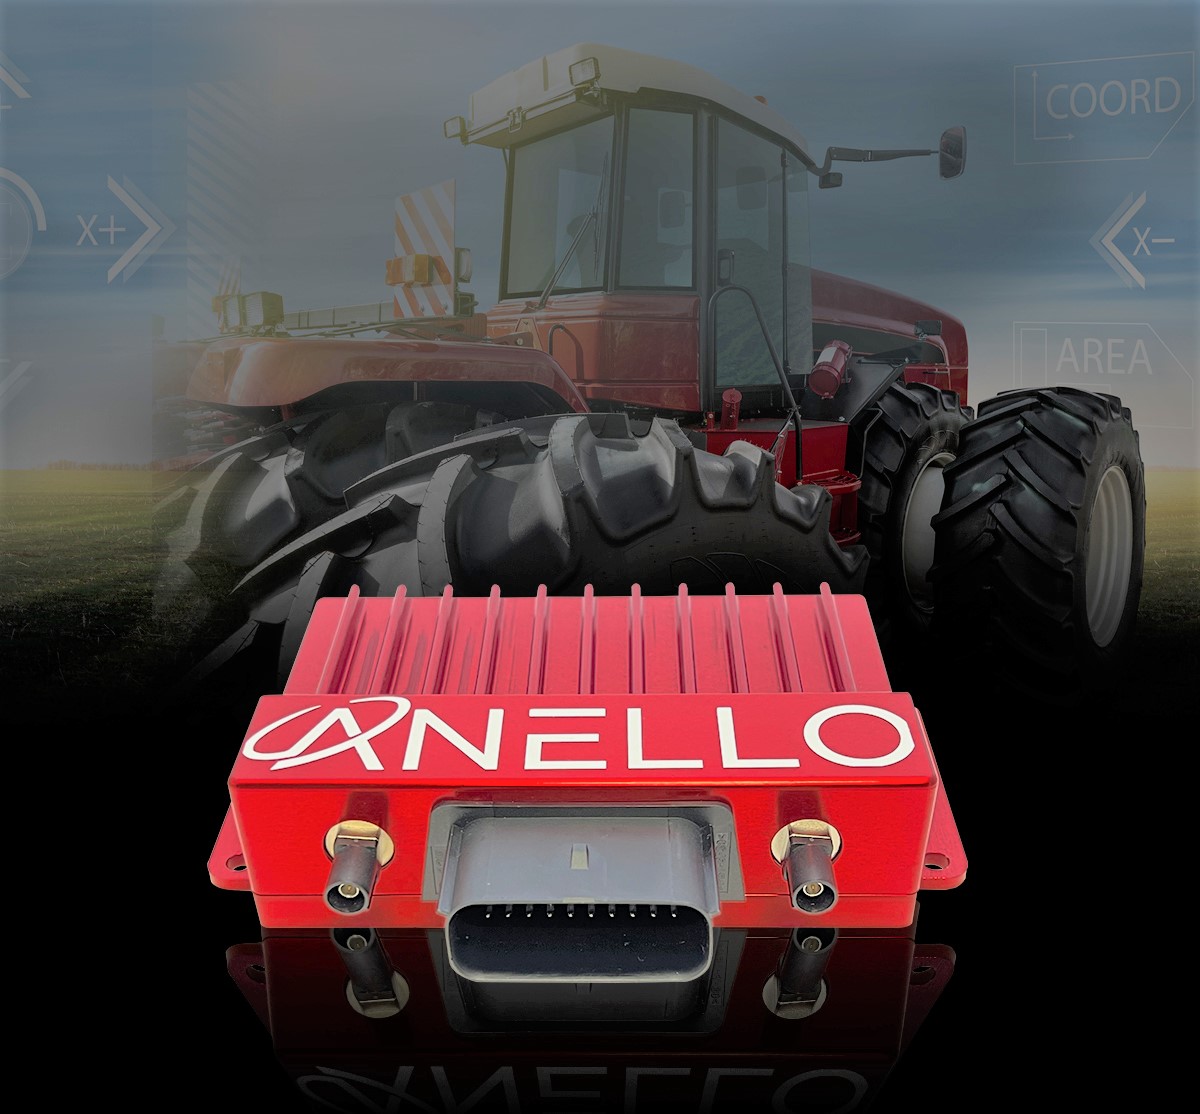 Anello’s GNSS INS system is targeting initial markets like agricultural vehicles.